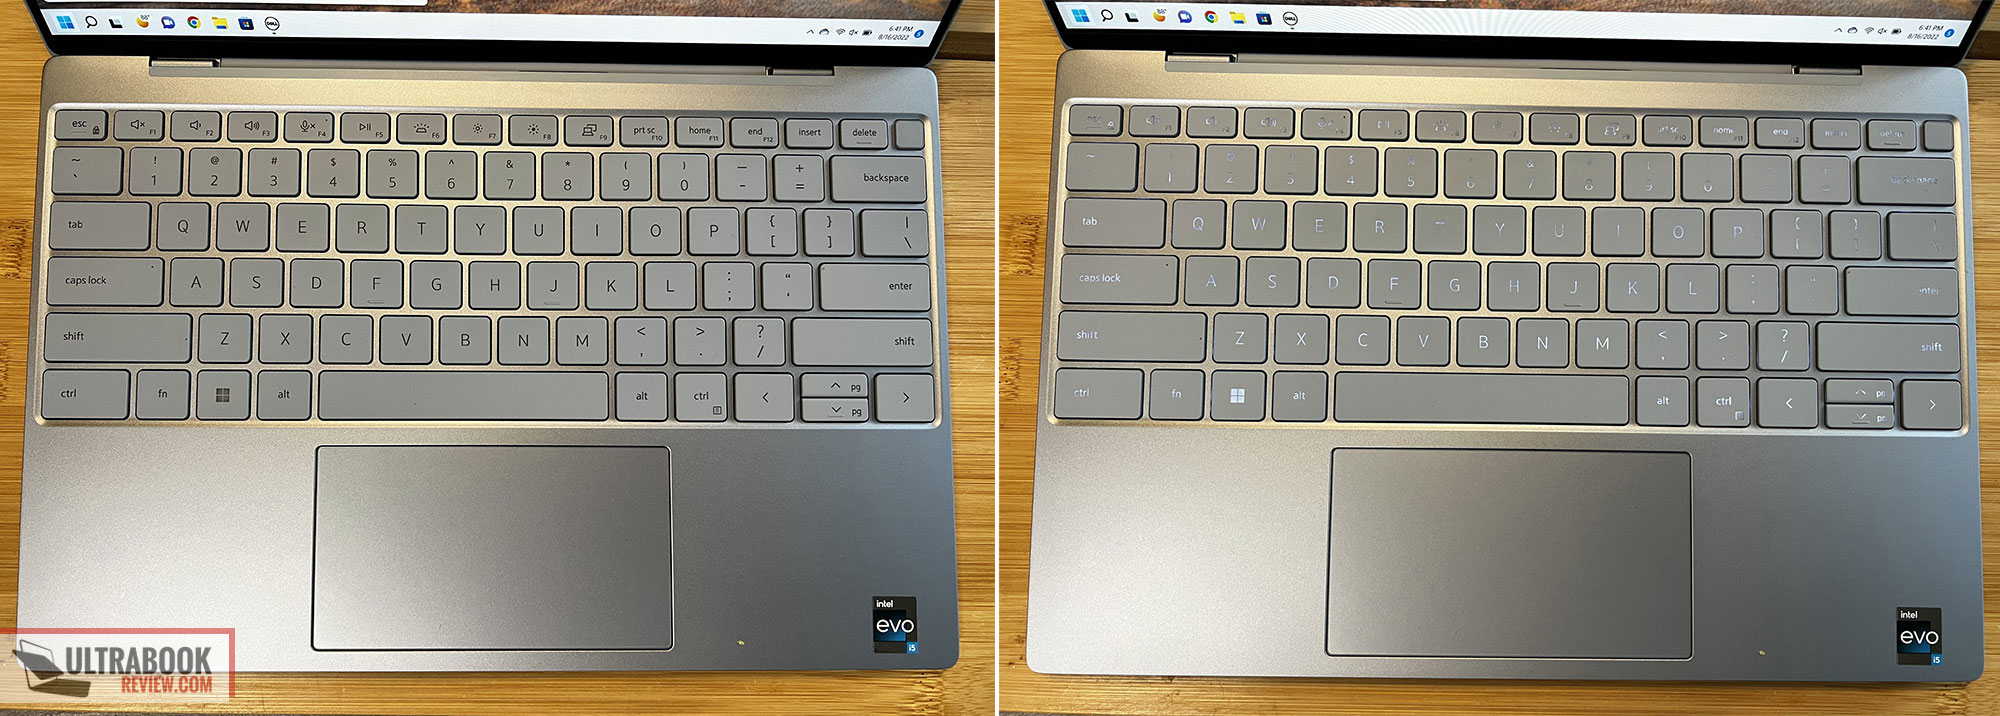 Dell XPS 13 9315 Laptop Review: Ultralight Battery Life Champ